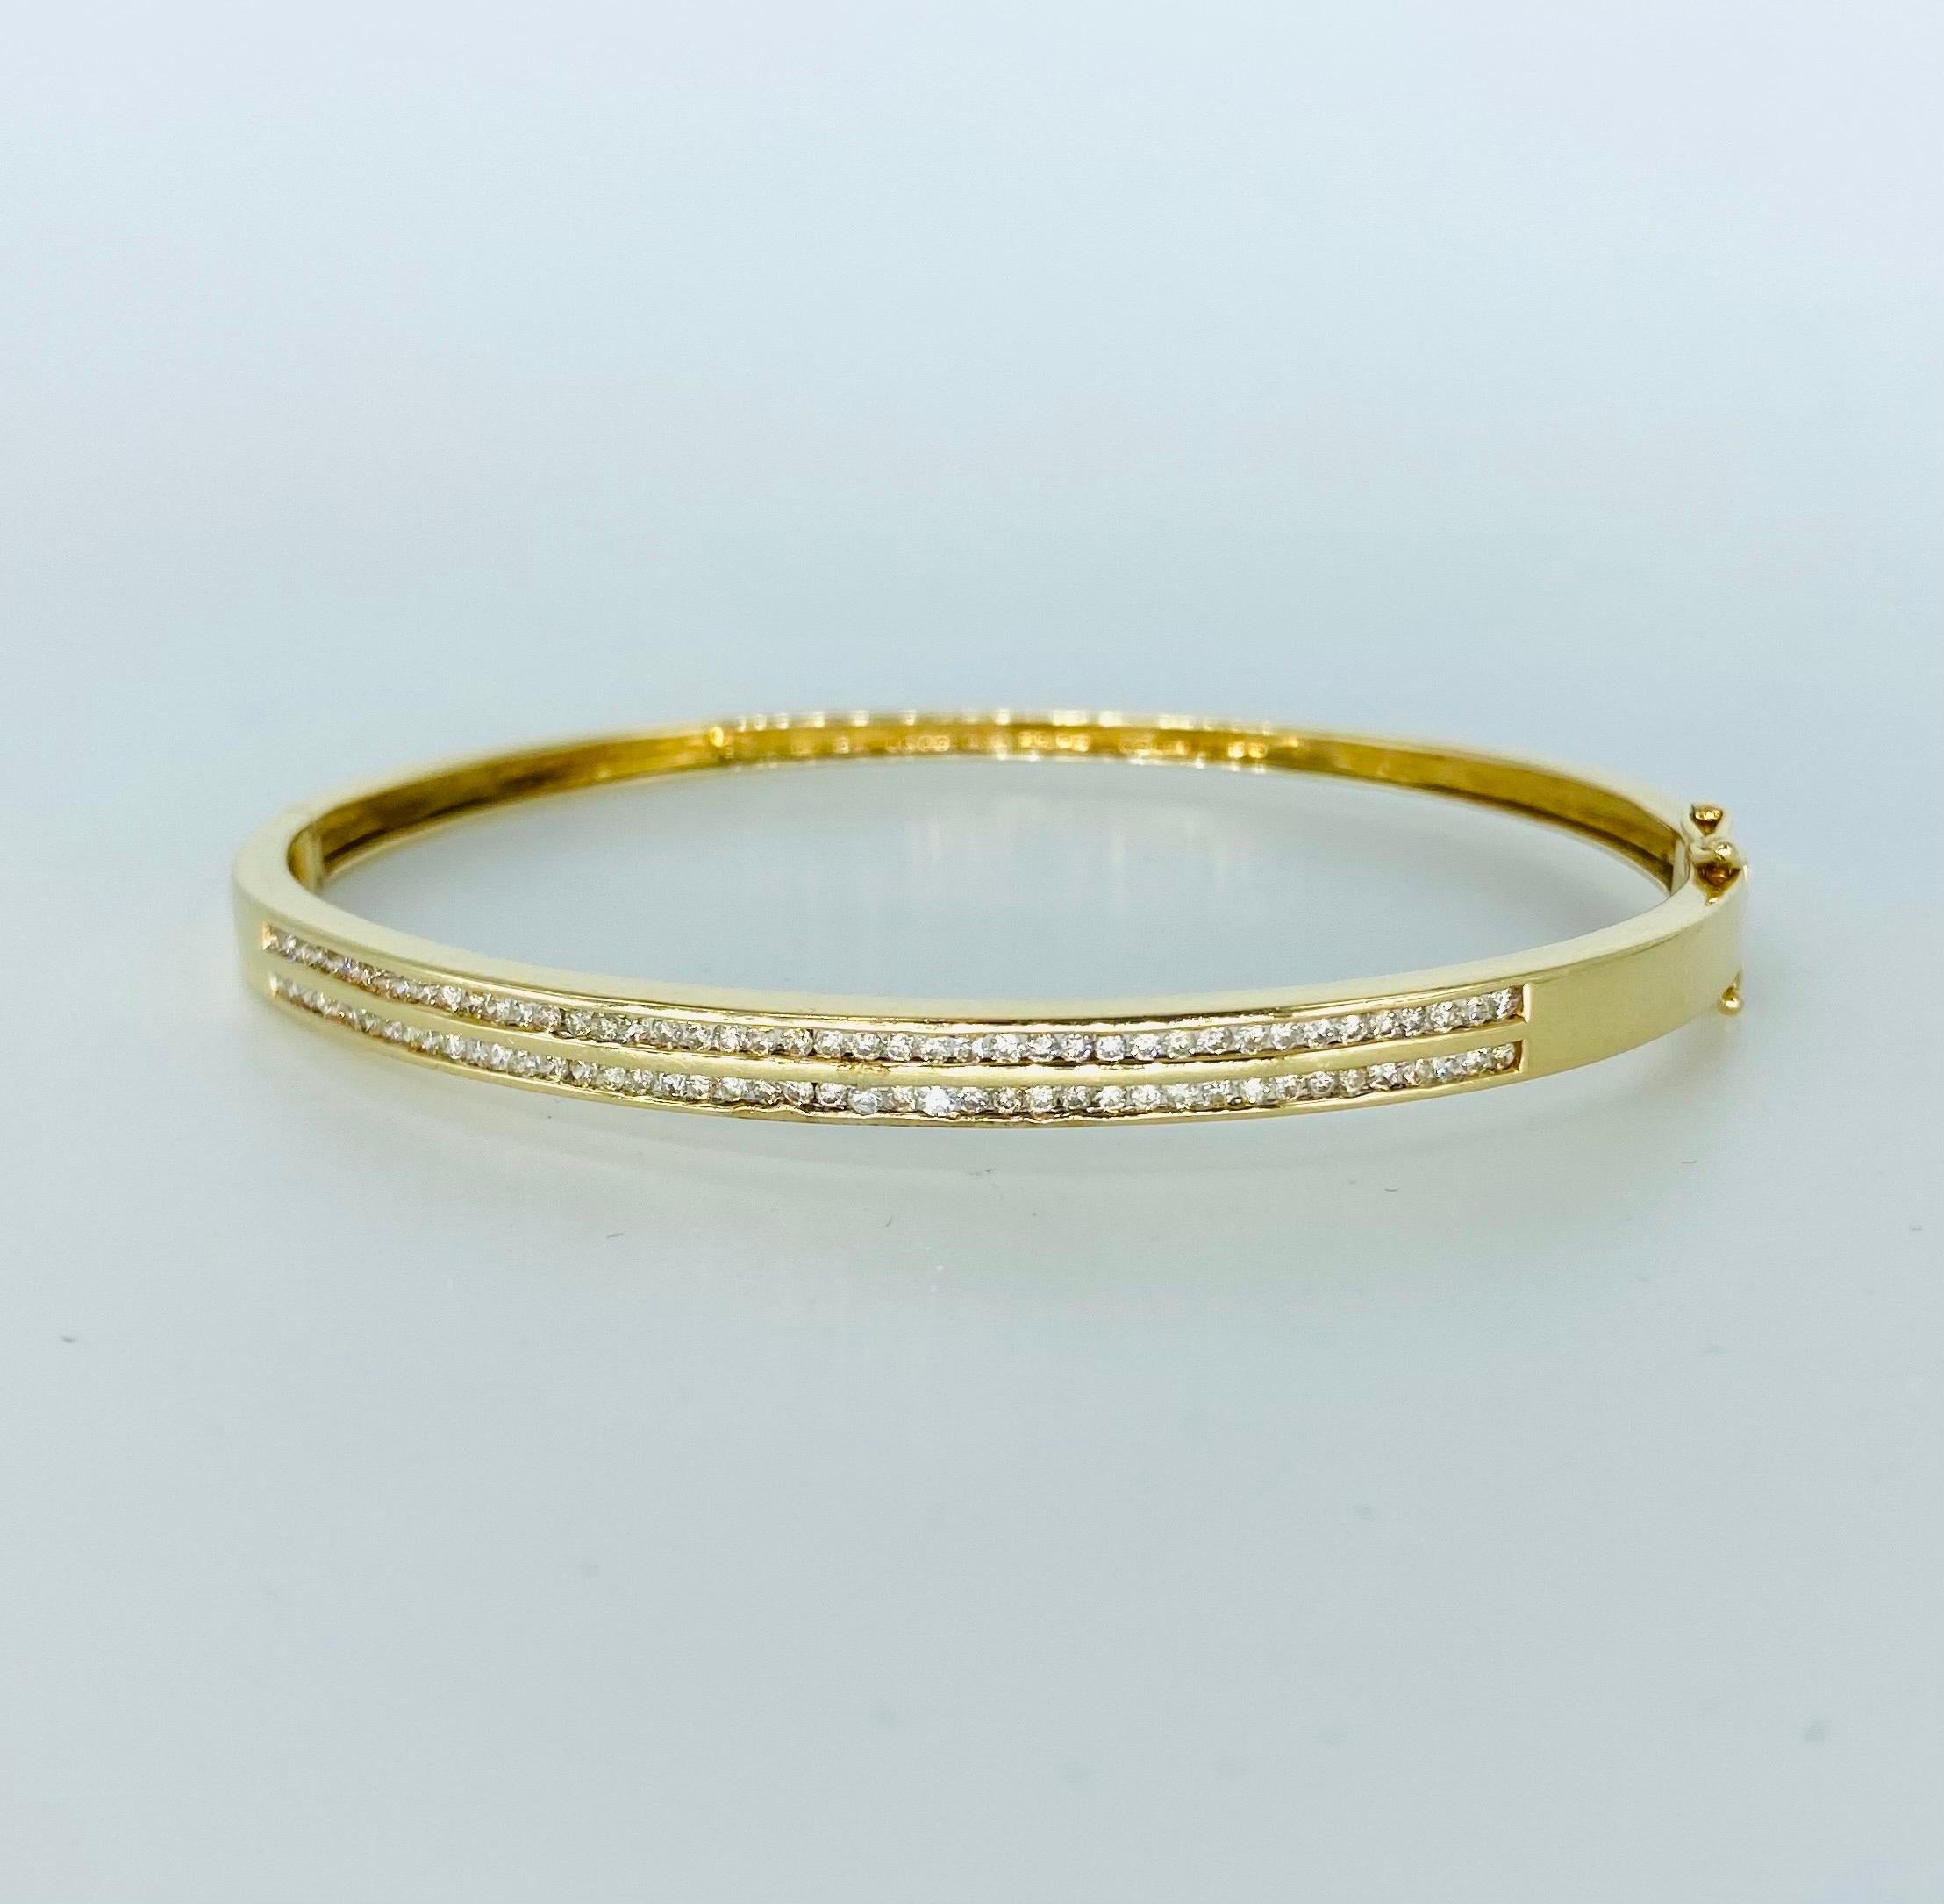 Vintage 1.75 Carat Two-Row Champagne Diamonds Bangle 14k Gold. The bangle features 88 round brilliant diamonds in champagne color. The bangle weights 11 grams 14k gold and measures 4.5mm in height. The bangle fits up to 7 inches wrist.